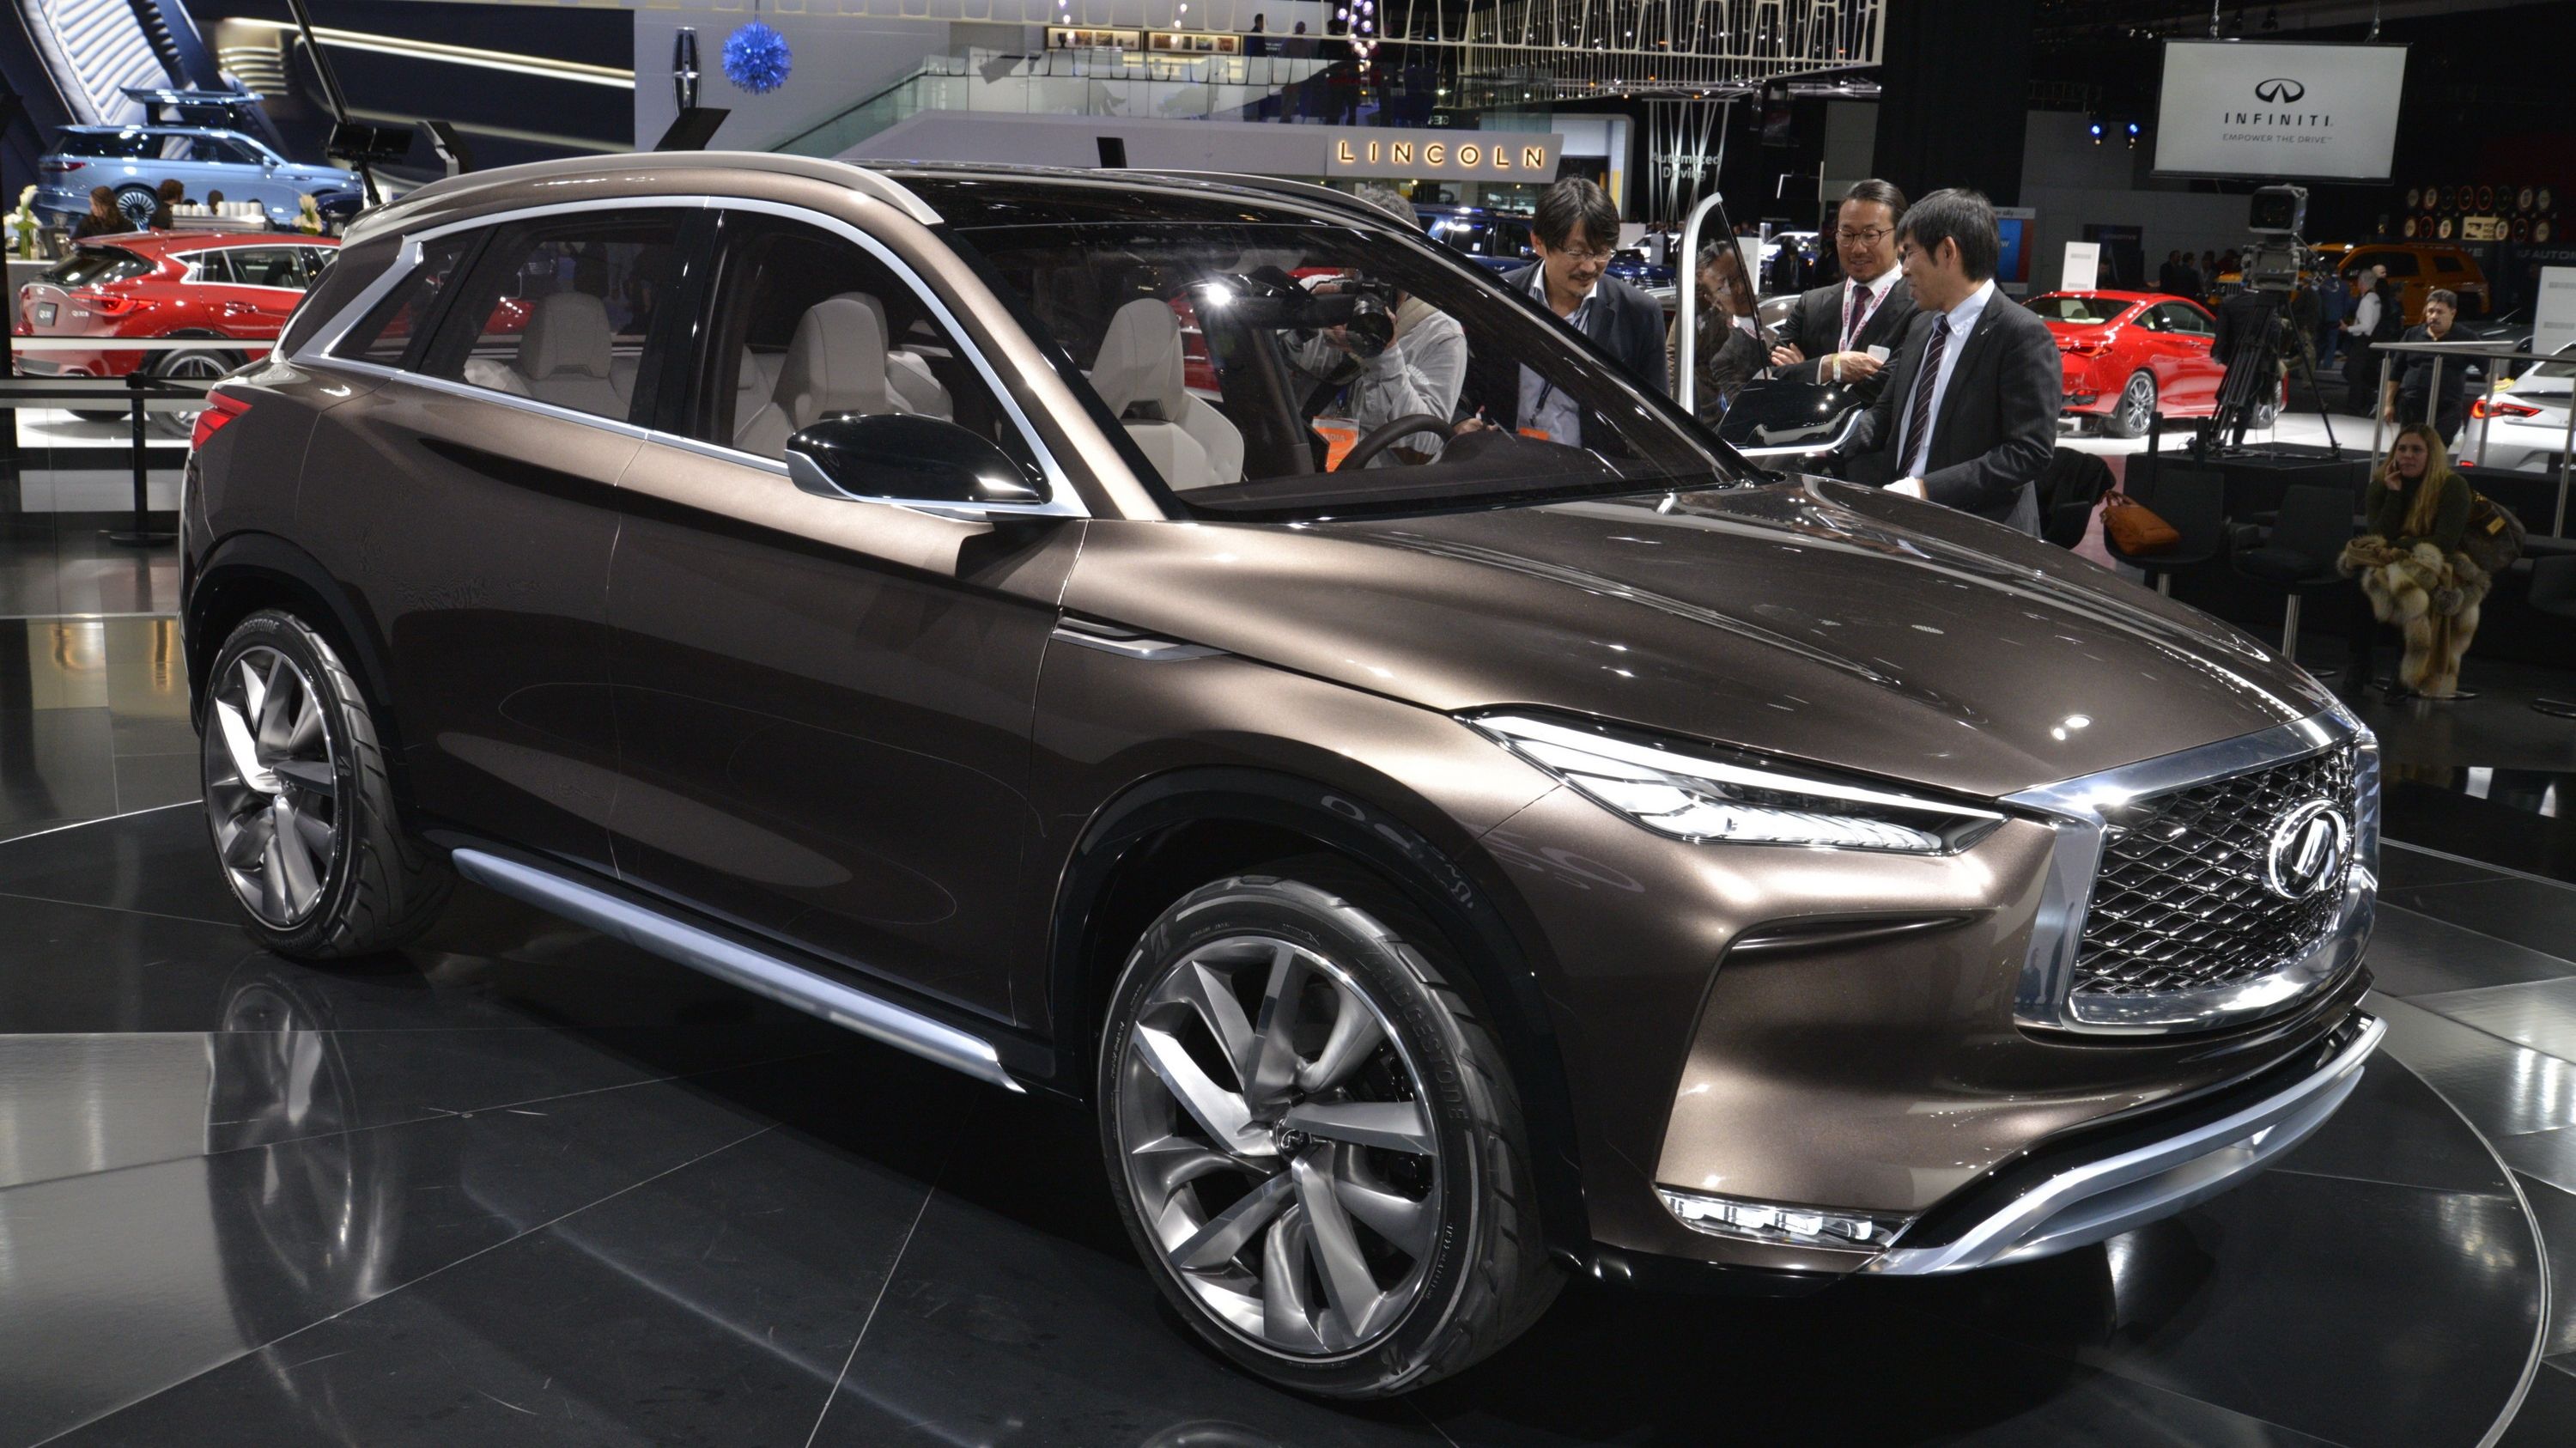 2018 Infiniti QX50 Concept’s Internal Combustion Engine Will Beat Up Your Hybrid